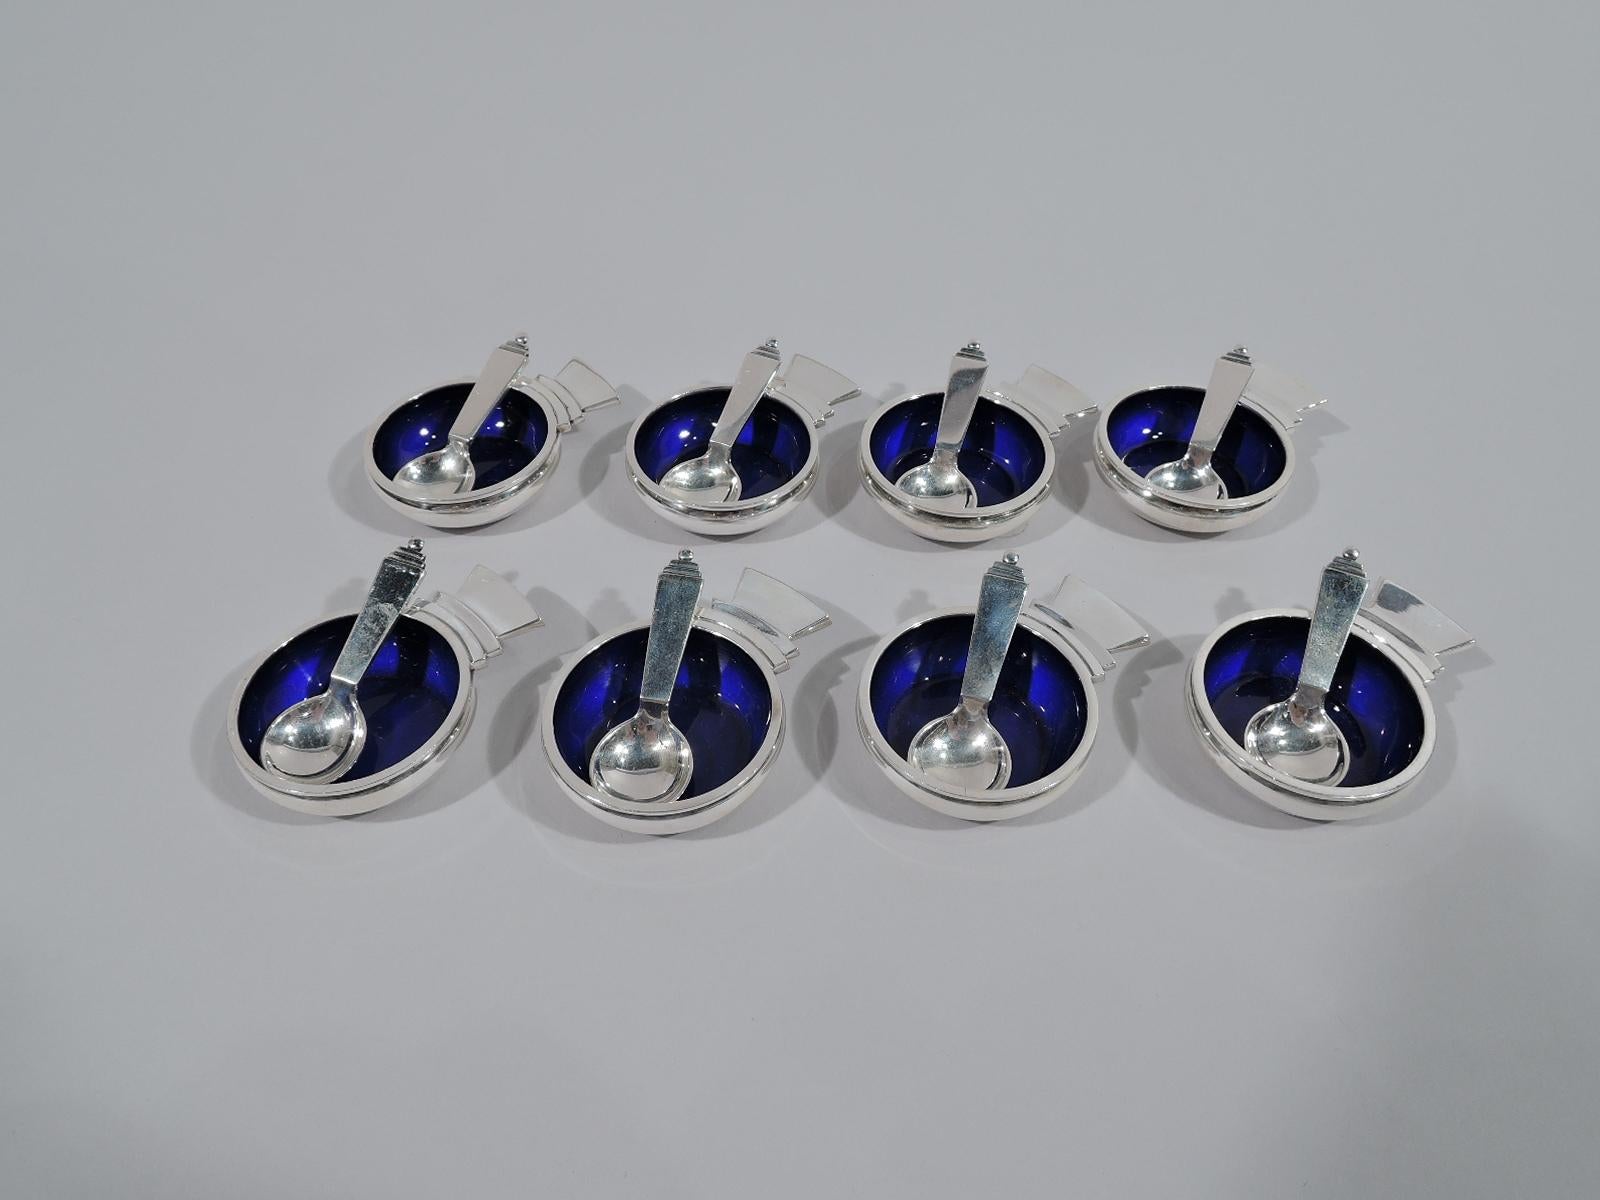 Set of 8 sterling silver open salts and spoons in Pyramid. Made by Georg Jensen in Copenhagen.

Each salt: Shallow and curved bowl with capital-style handle. Interior lined with cobalt enamel. Each spoon: Round bowl and straight and tapering